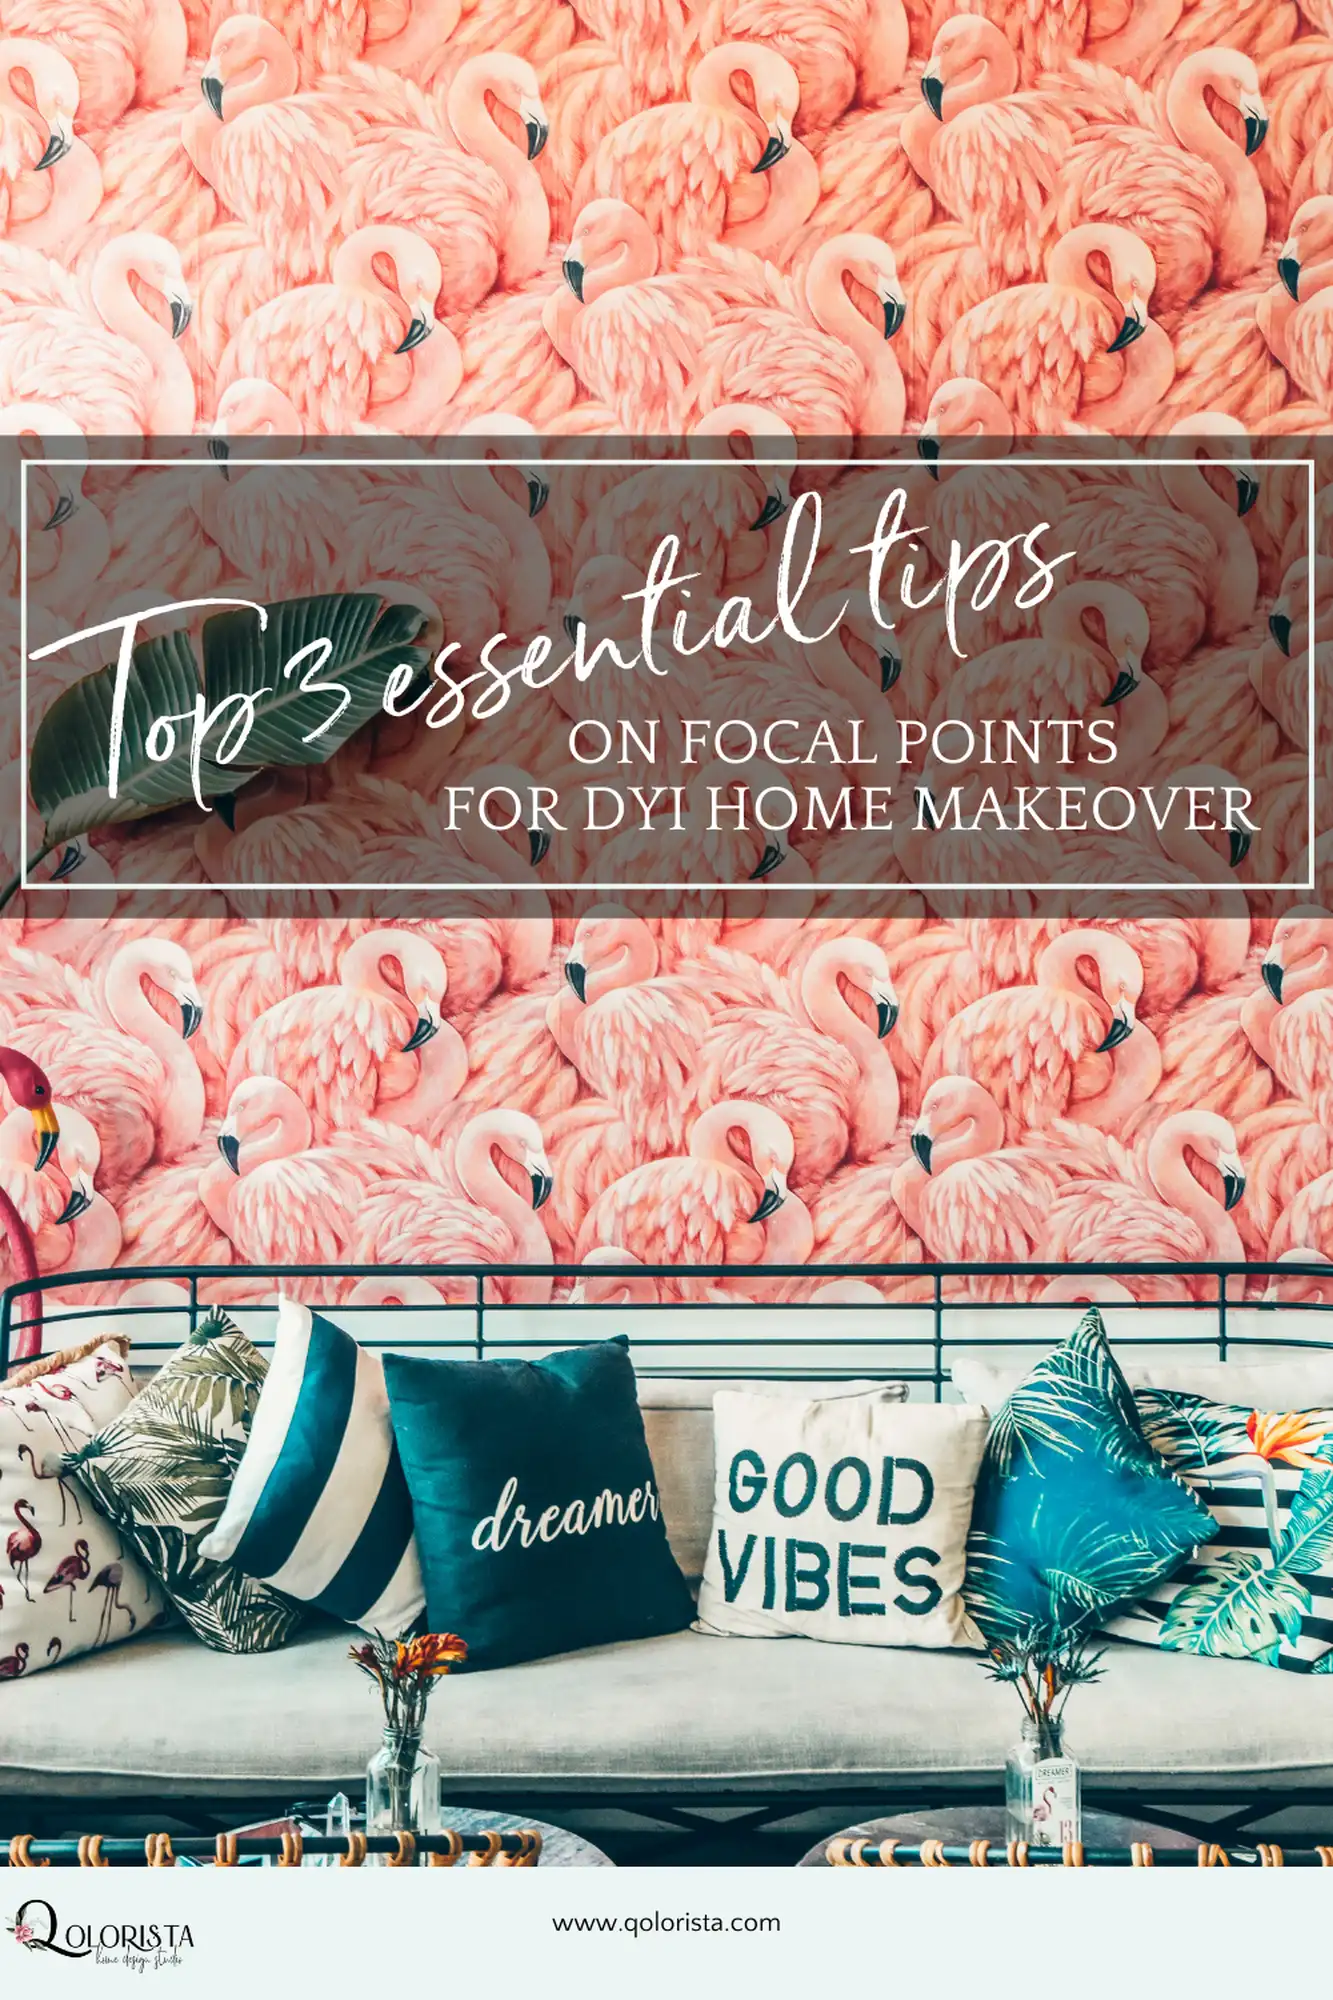 Top 3 Essential Tips On Focal Points For Dyi Home Makeover Pin52